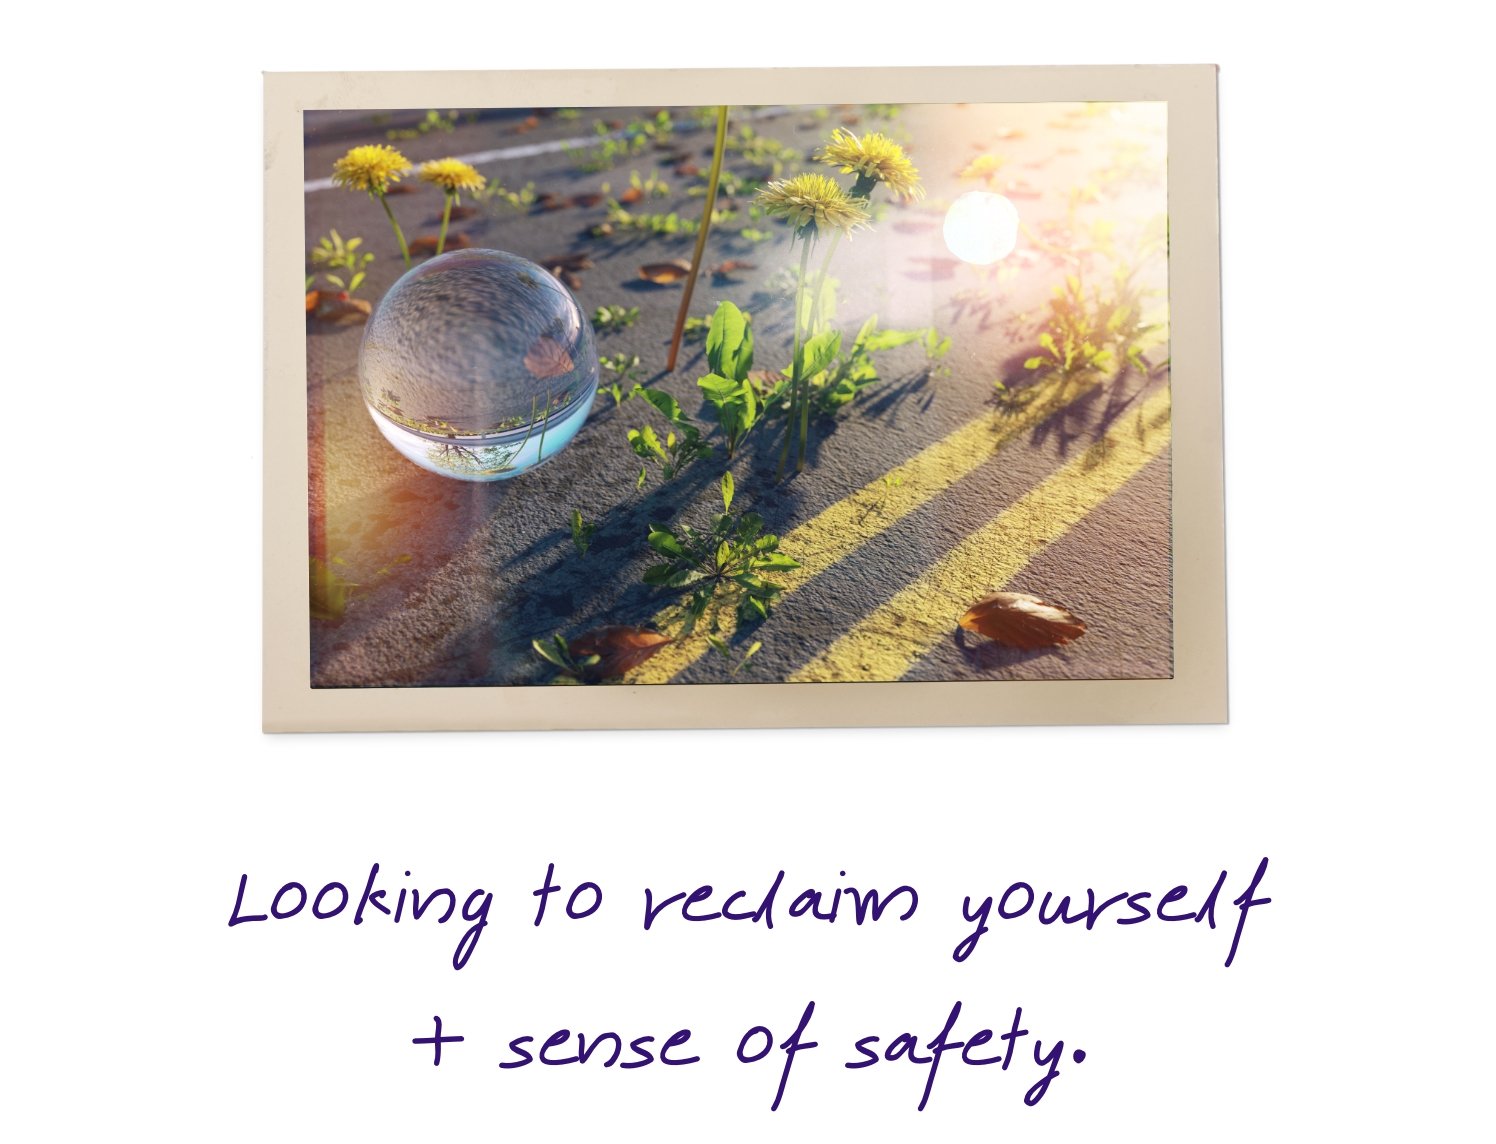 Looking to reclaim yourself + sense of safety.